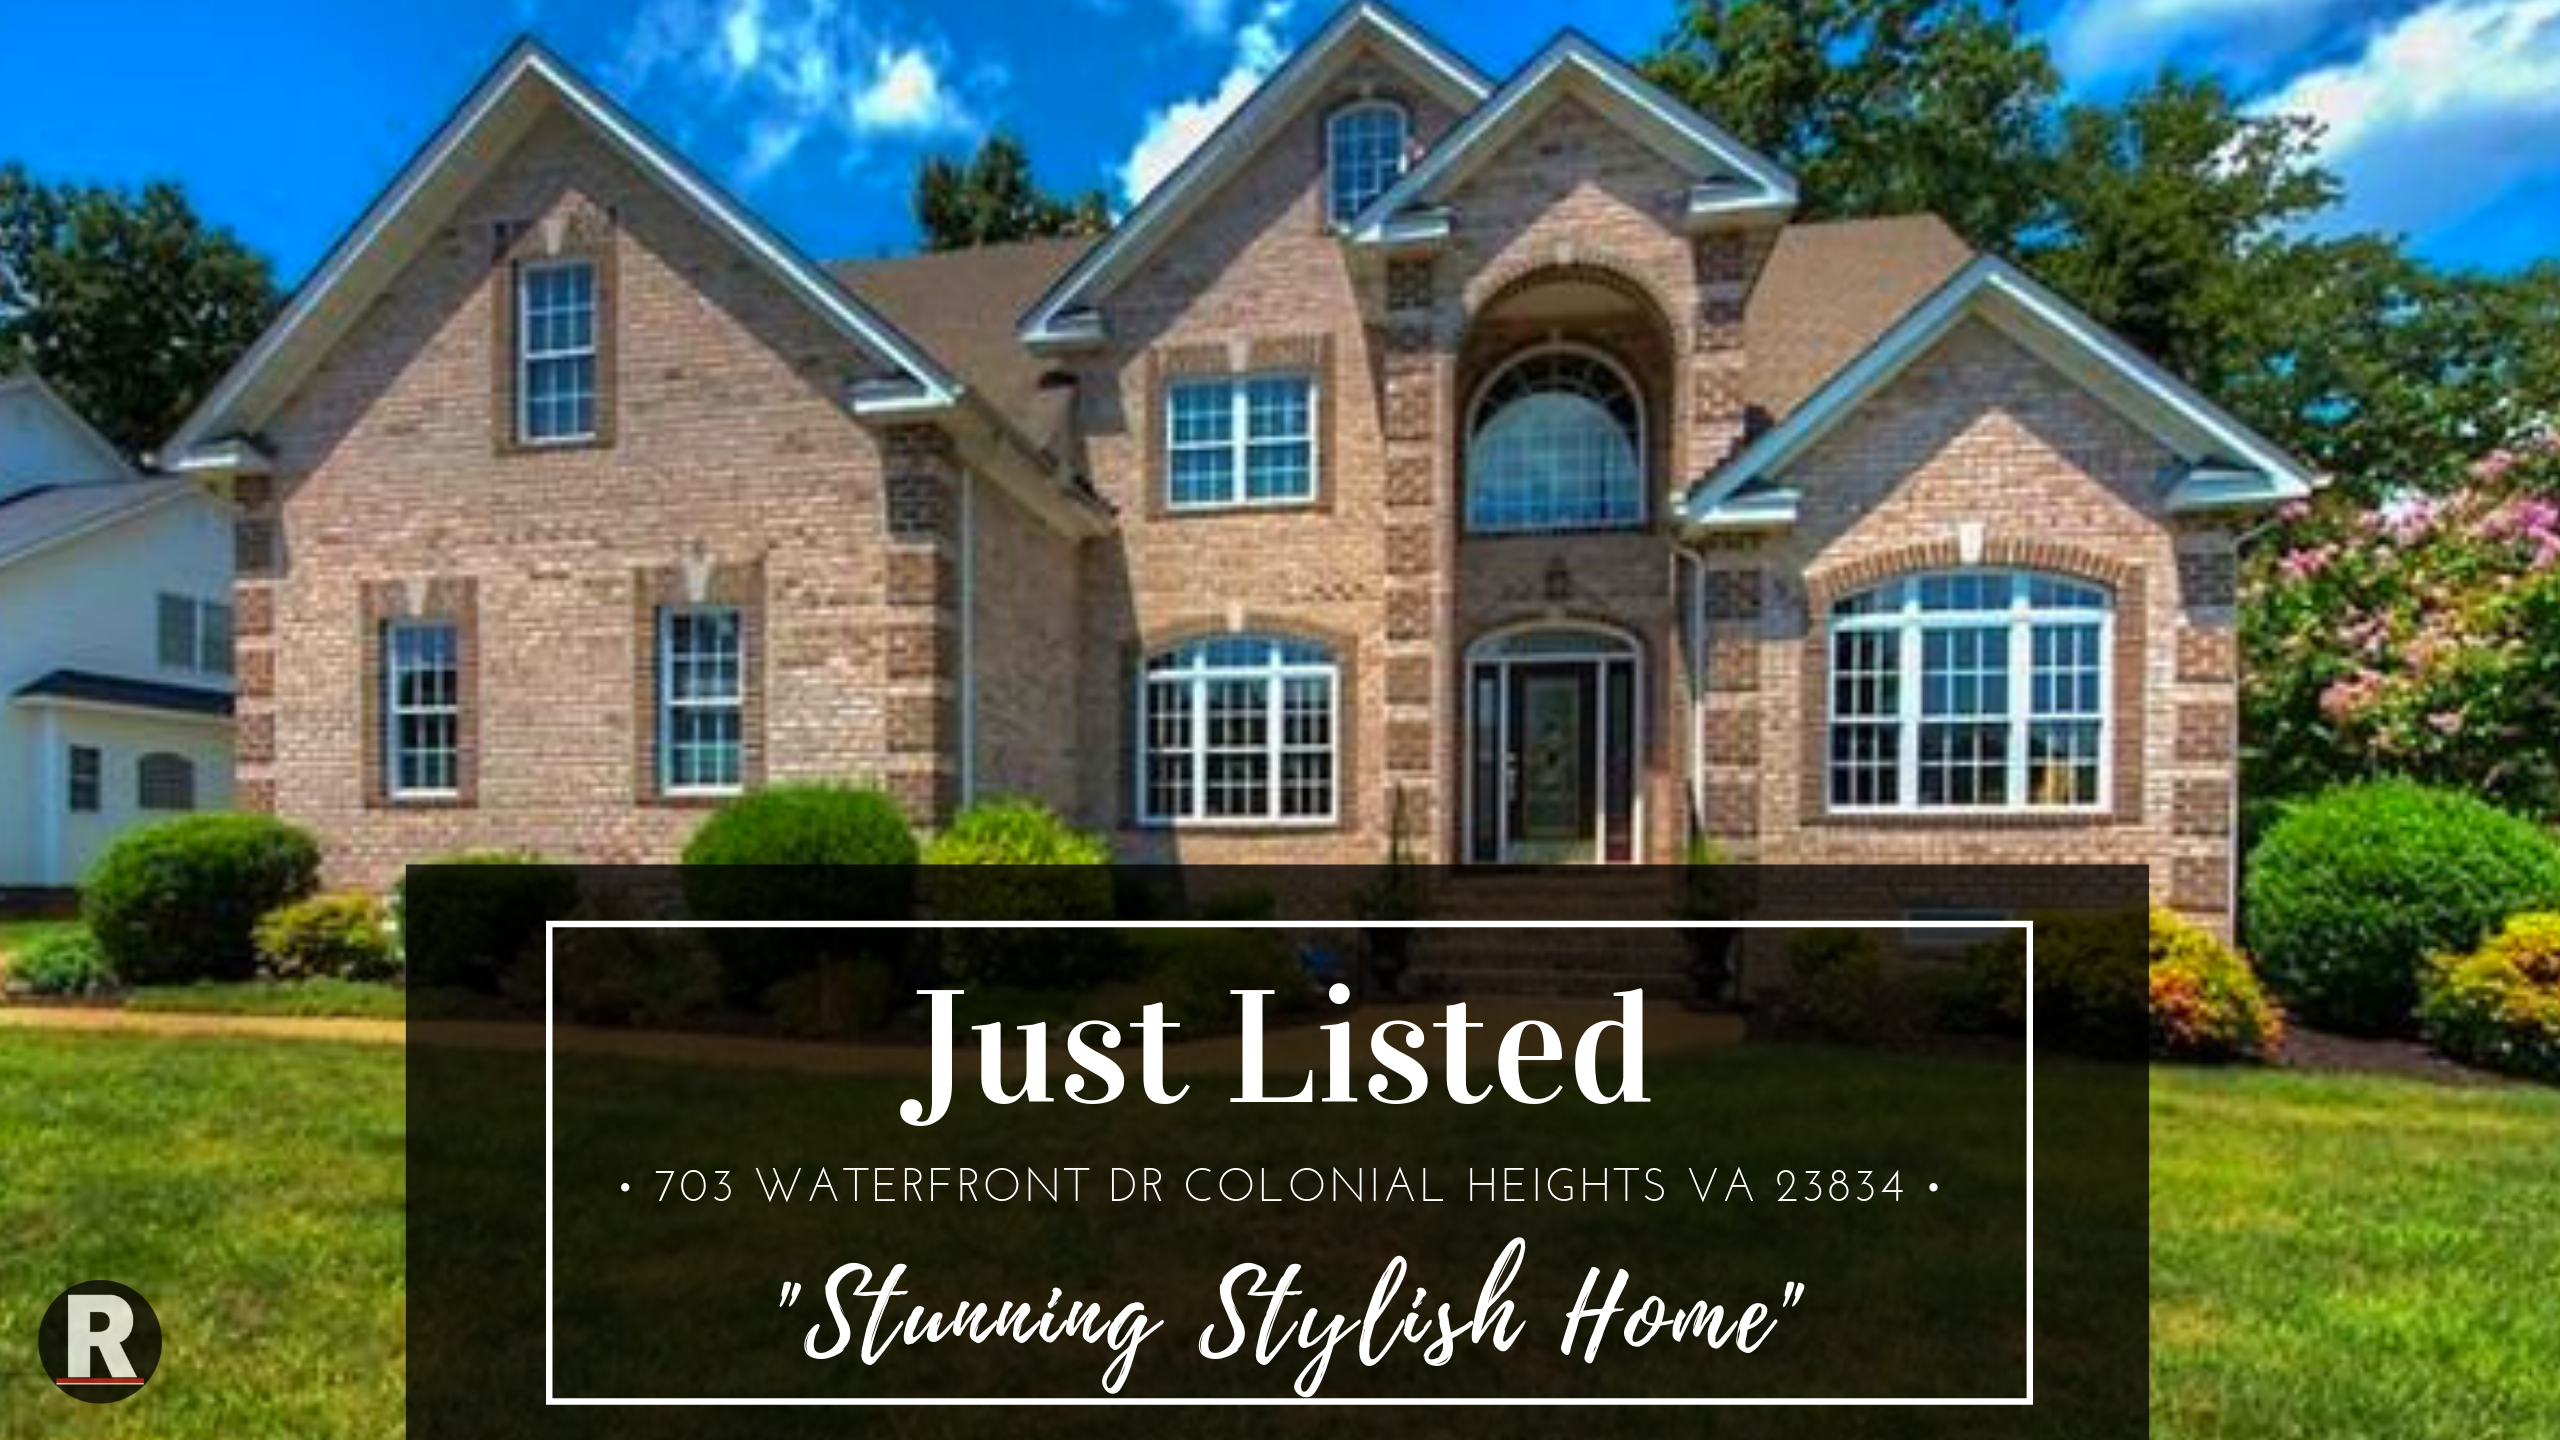 Just Listed! 703 Waterfront Dr Colonial Heights VA 23834